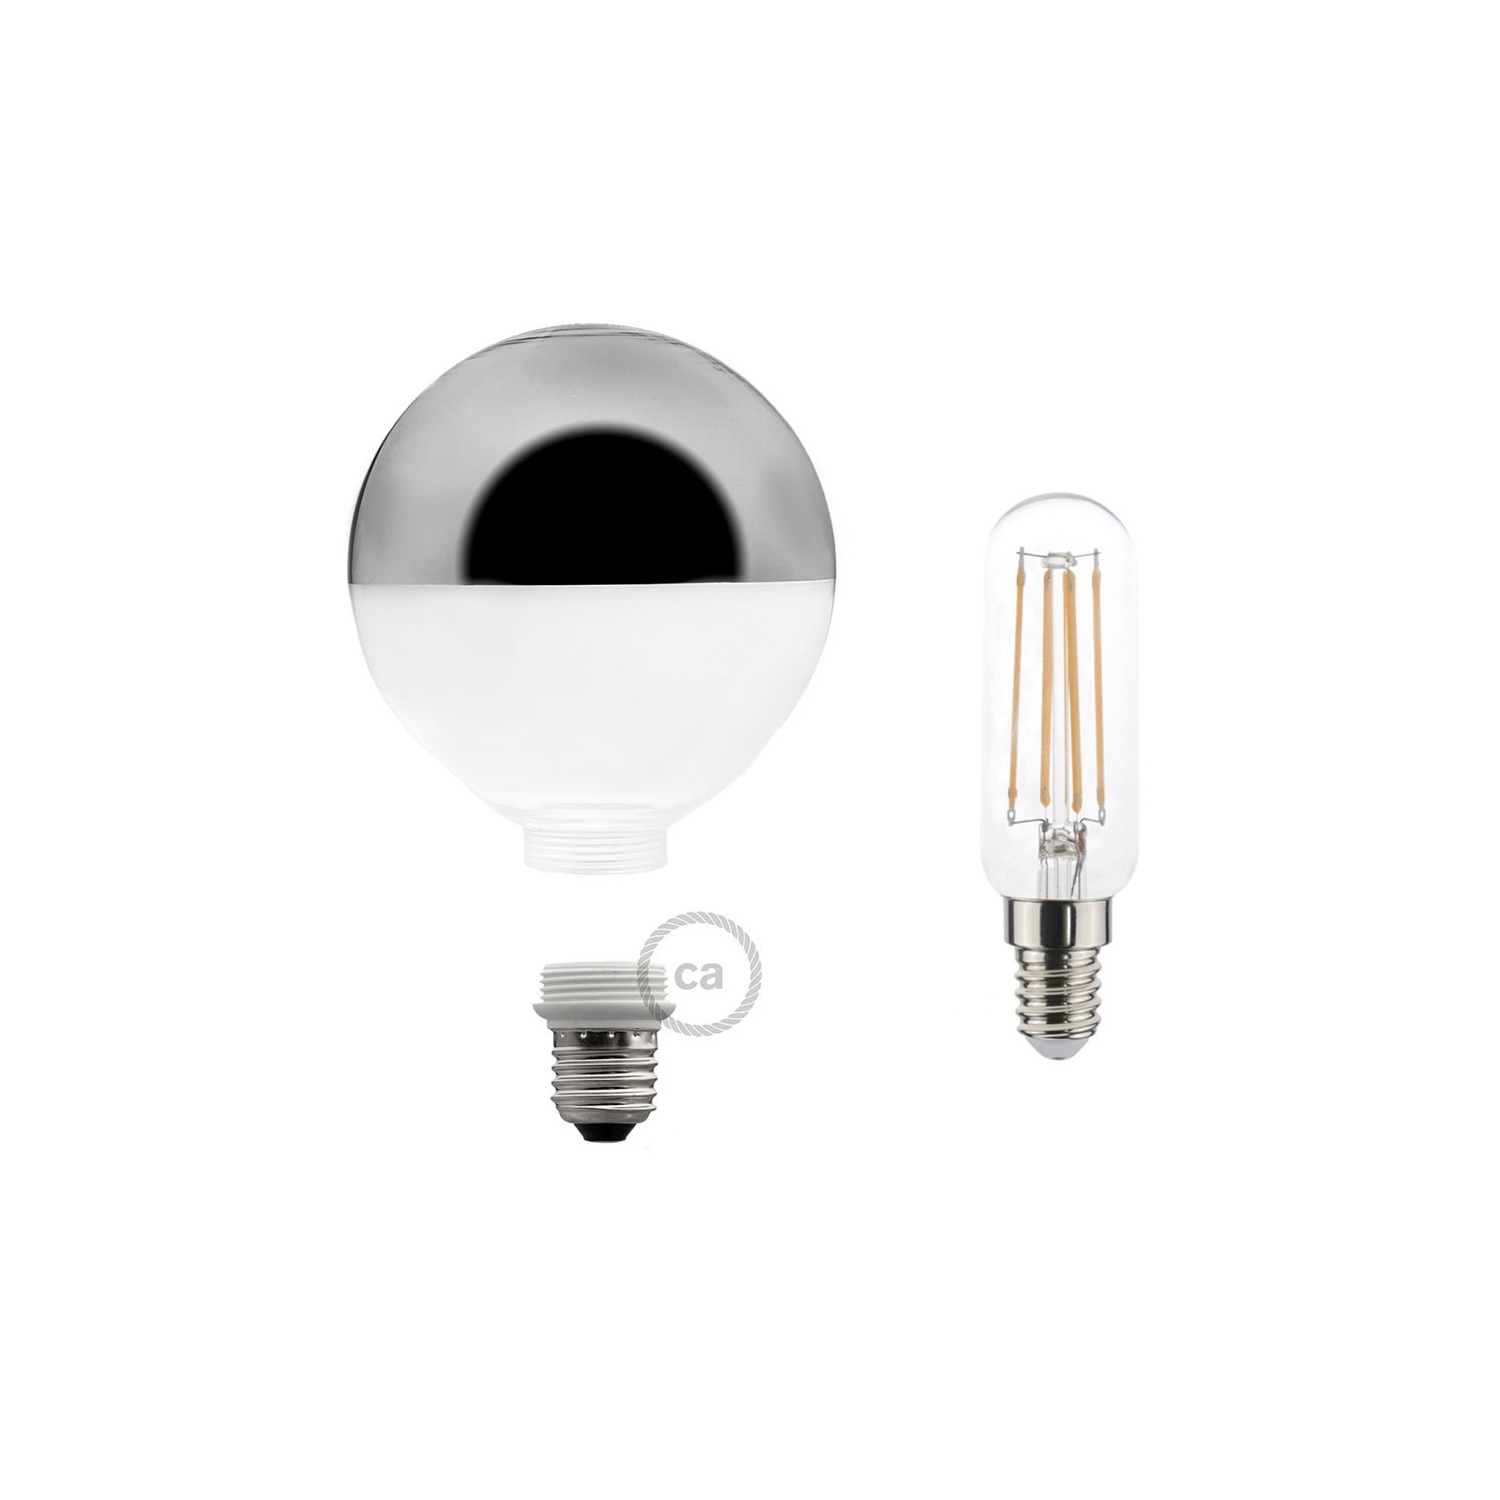 Modular LED Decorative Light bulb with Silver Semisphere 5W E27 Dimmable 2700K